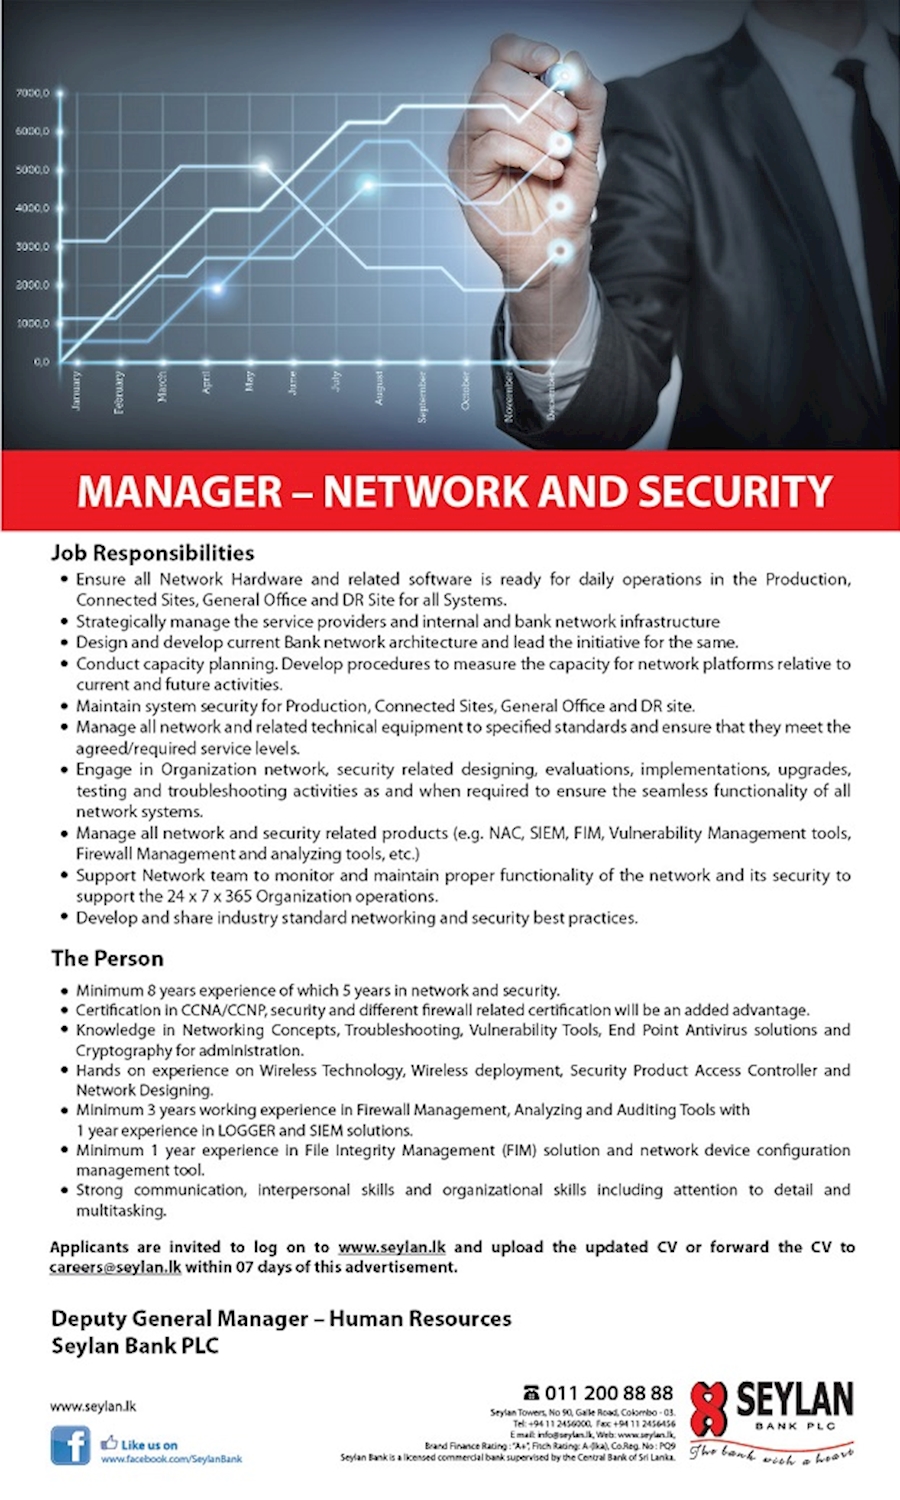 Manager - Network and Security